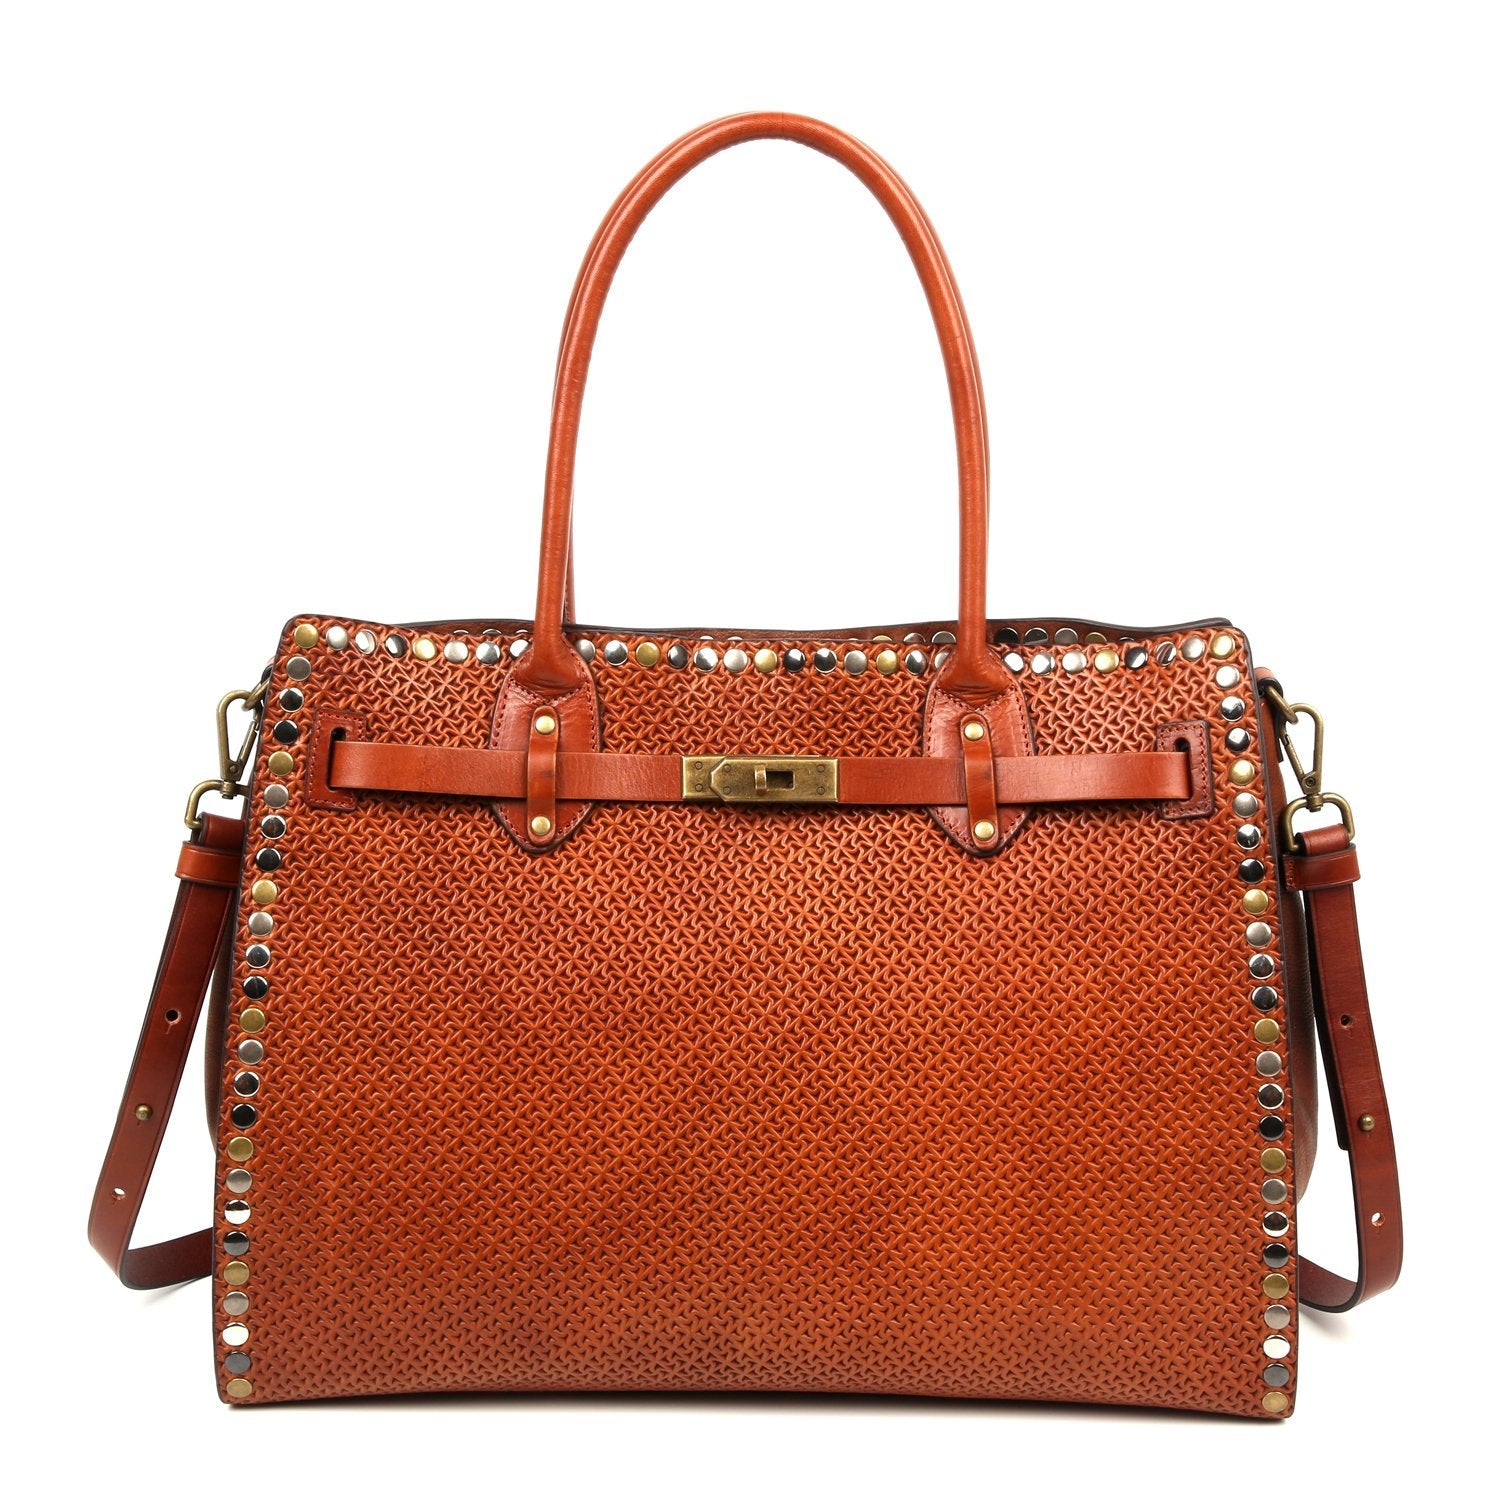 Hidesign Cerys Leather Satchel - Groovy Girl Gifts